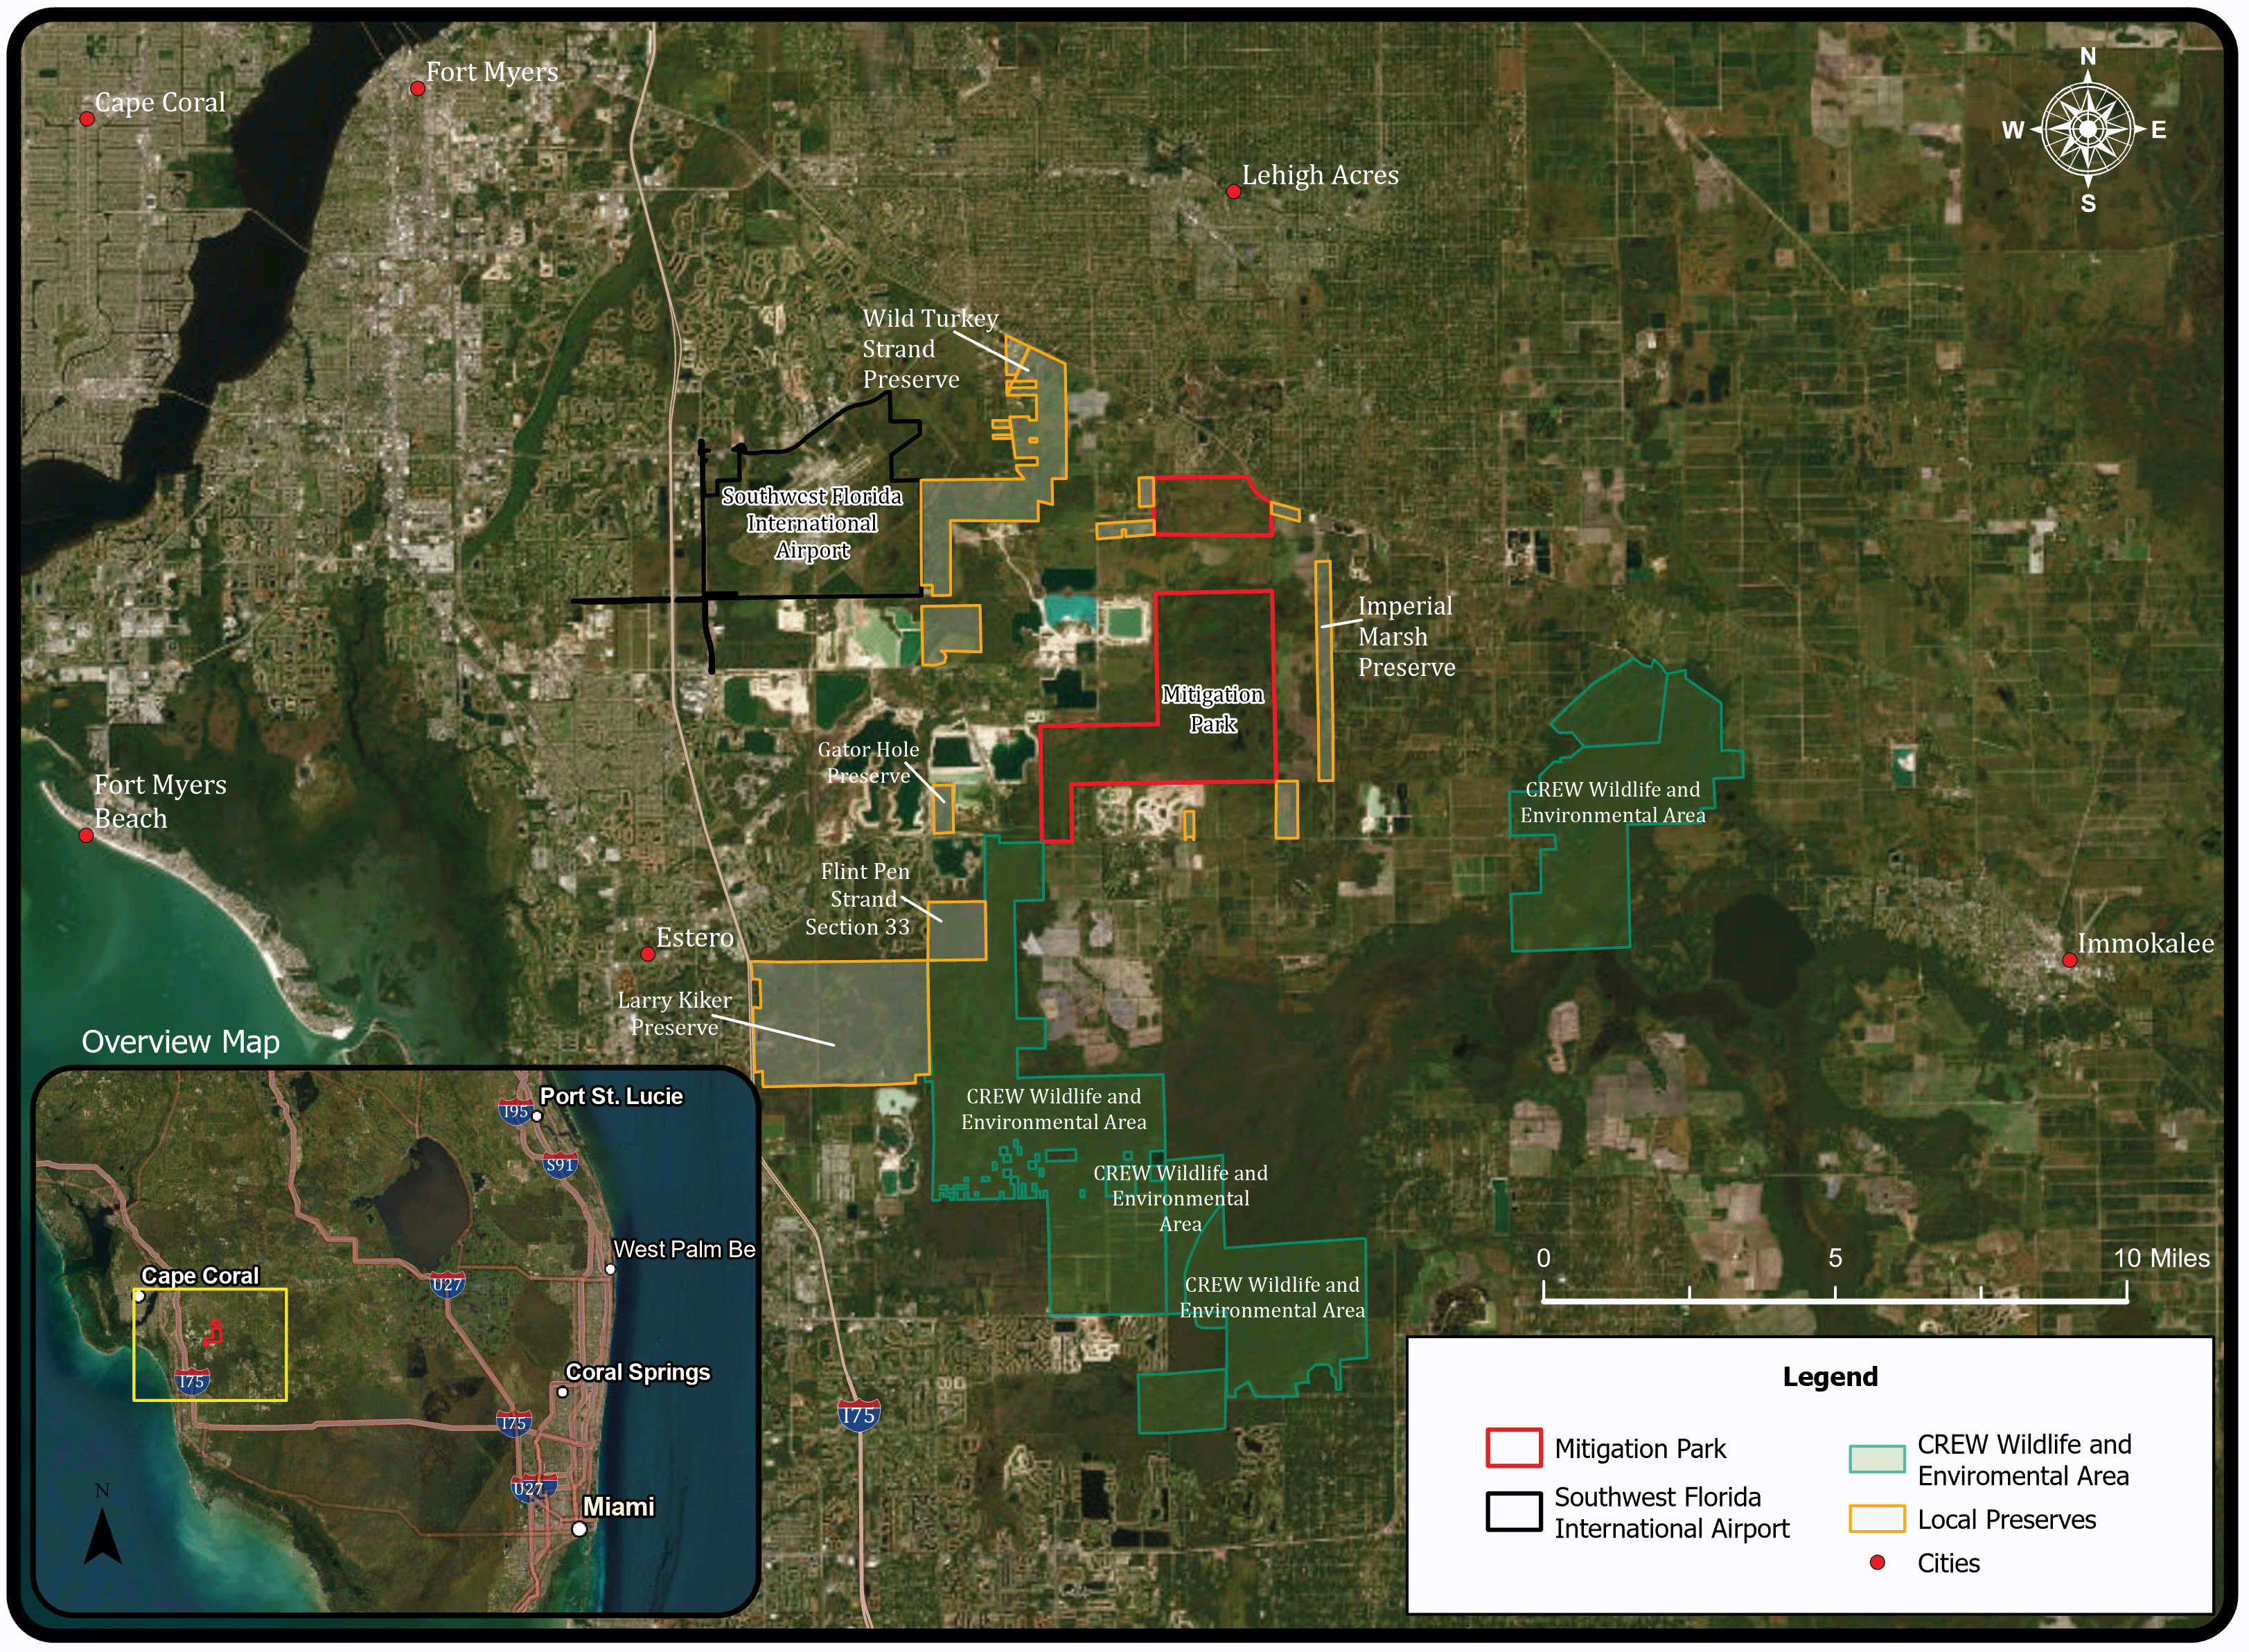 RSW Mitigation Park and Preserve Areas Location Map